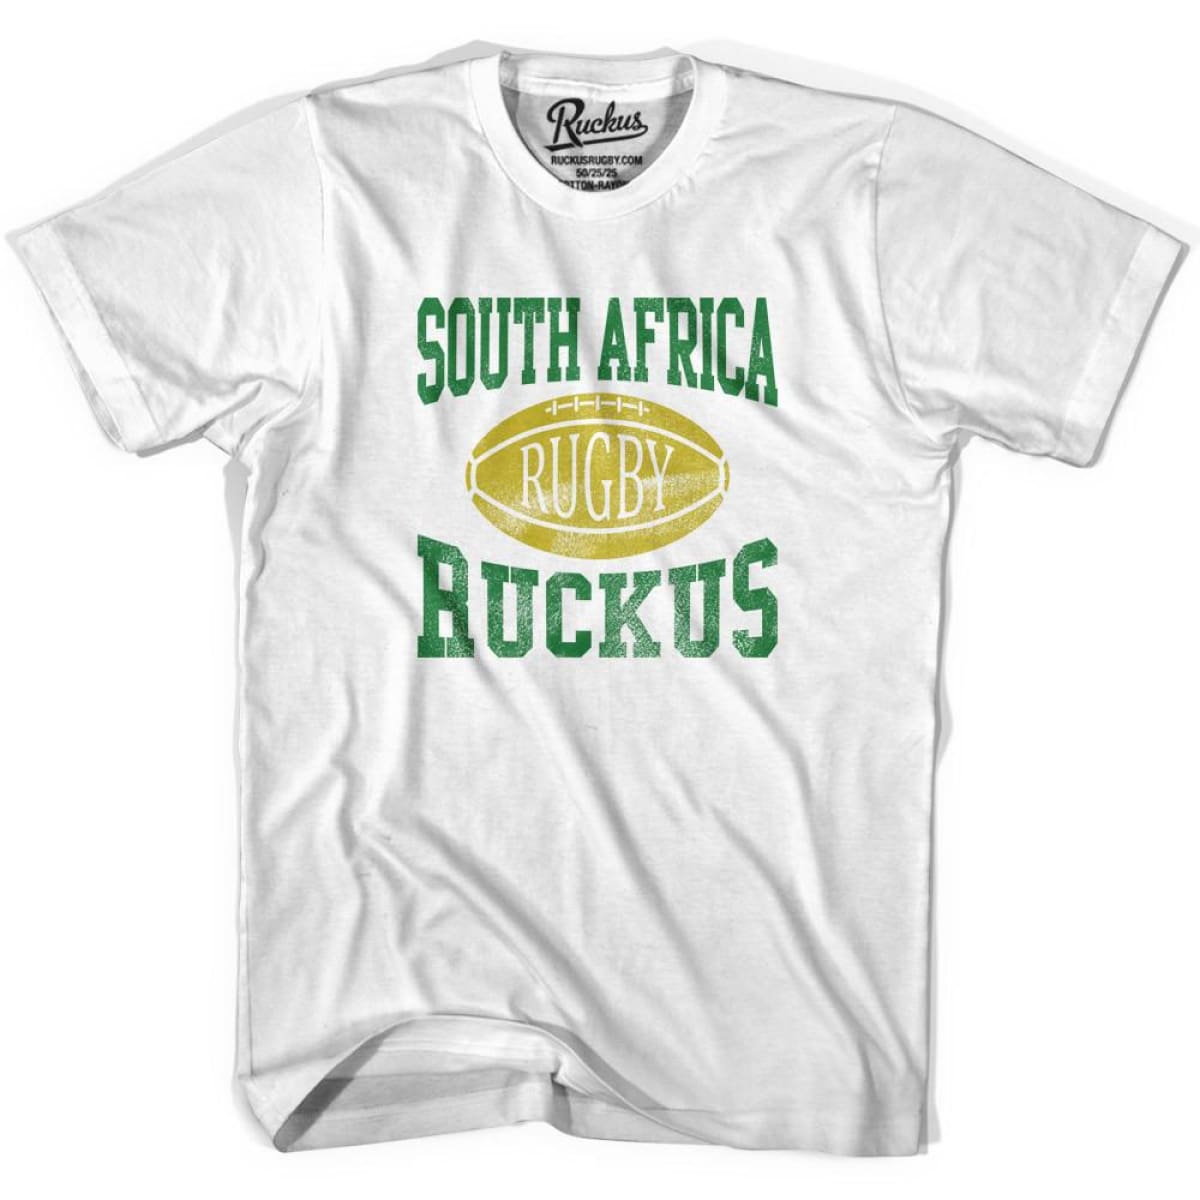 South Africa Ruckus Rugby for Sale | Ruckus Rugby, Rugby T-shirt, T- shirt | Ultras